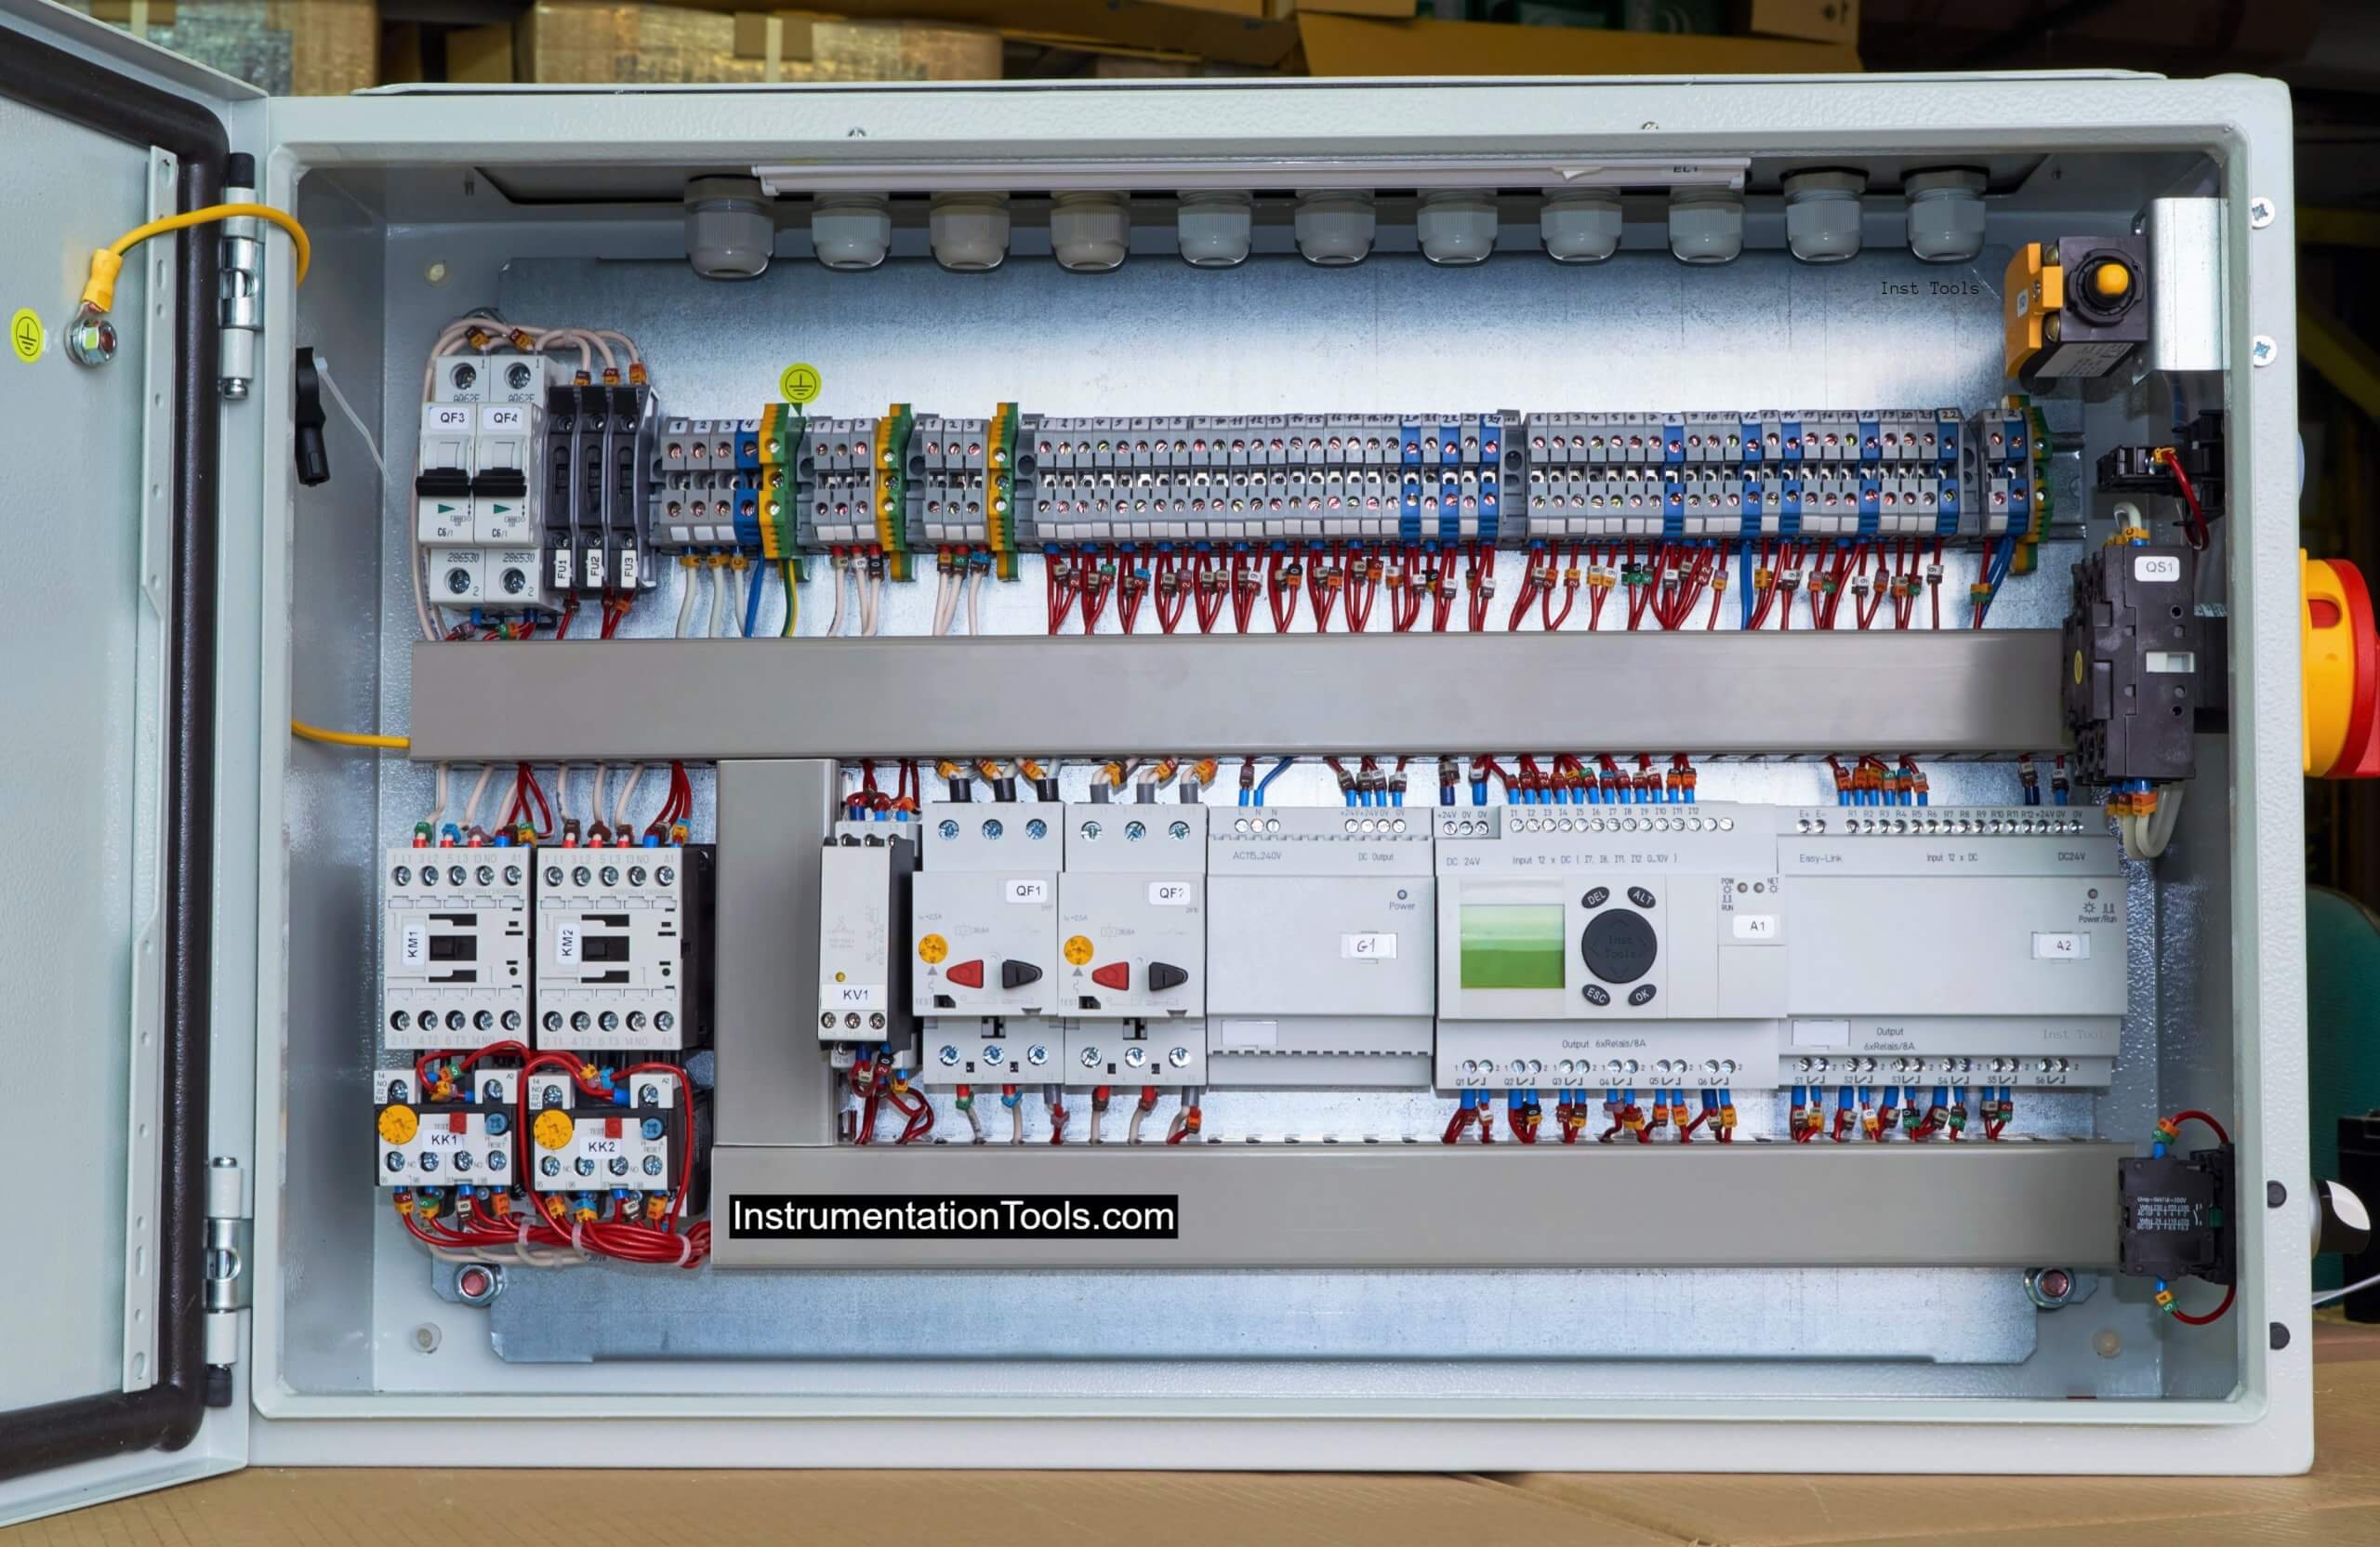 How to Filter Digital and Analog Inputs in a PLC